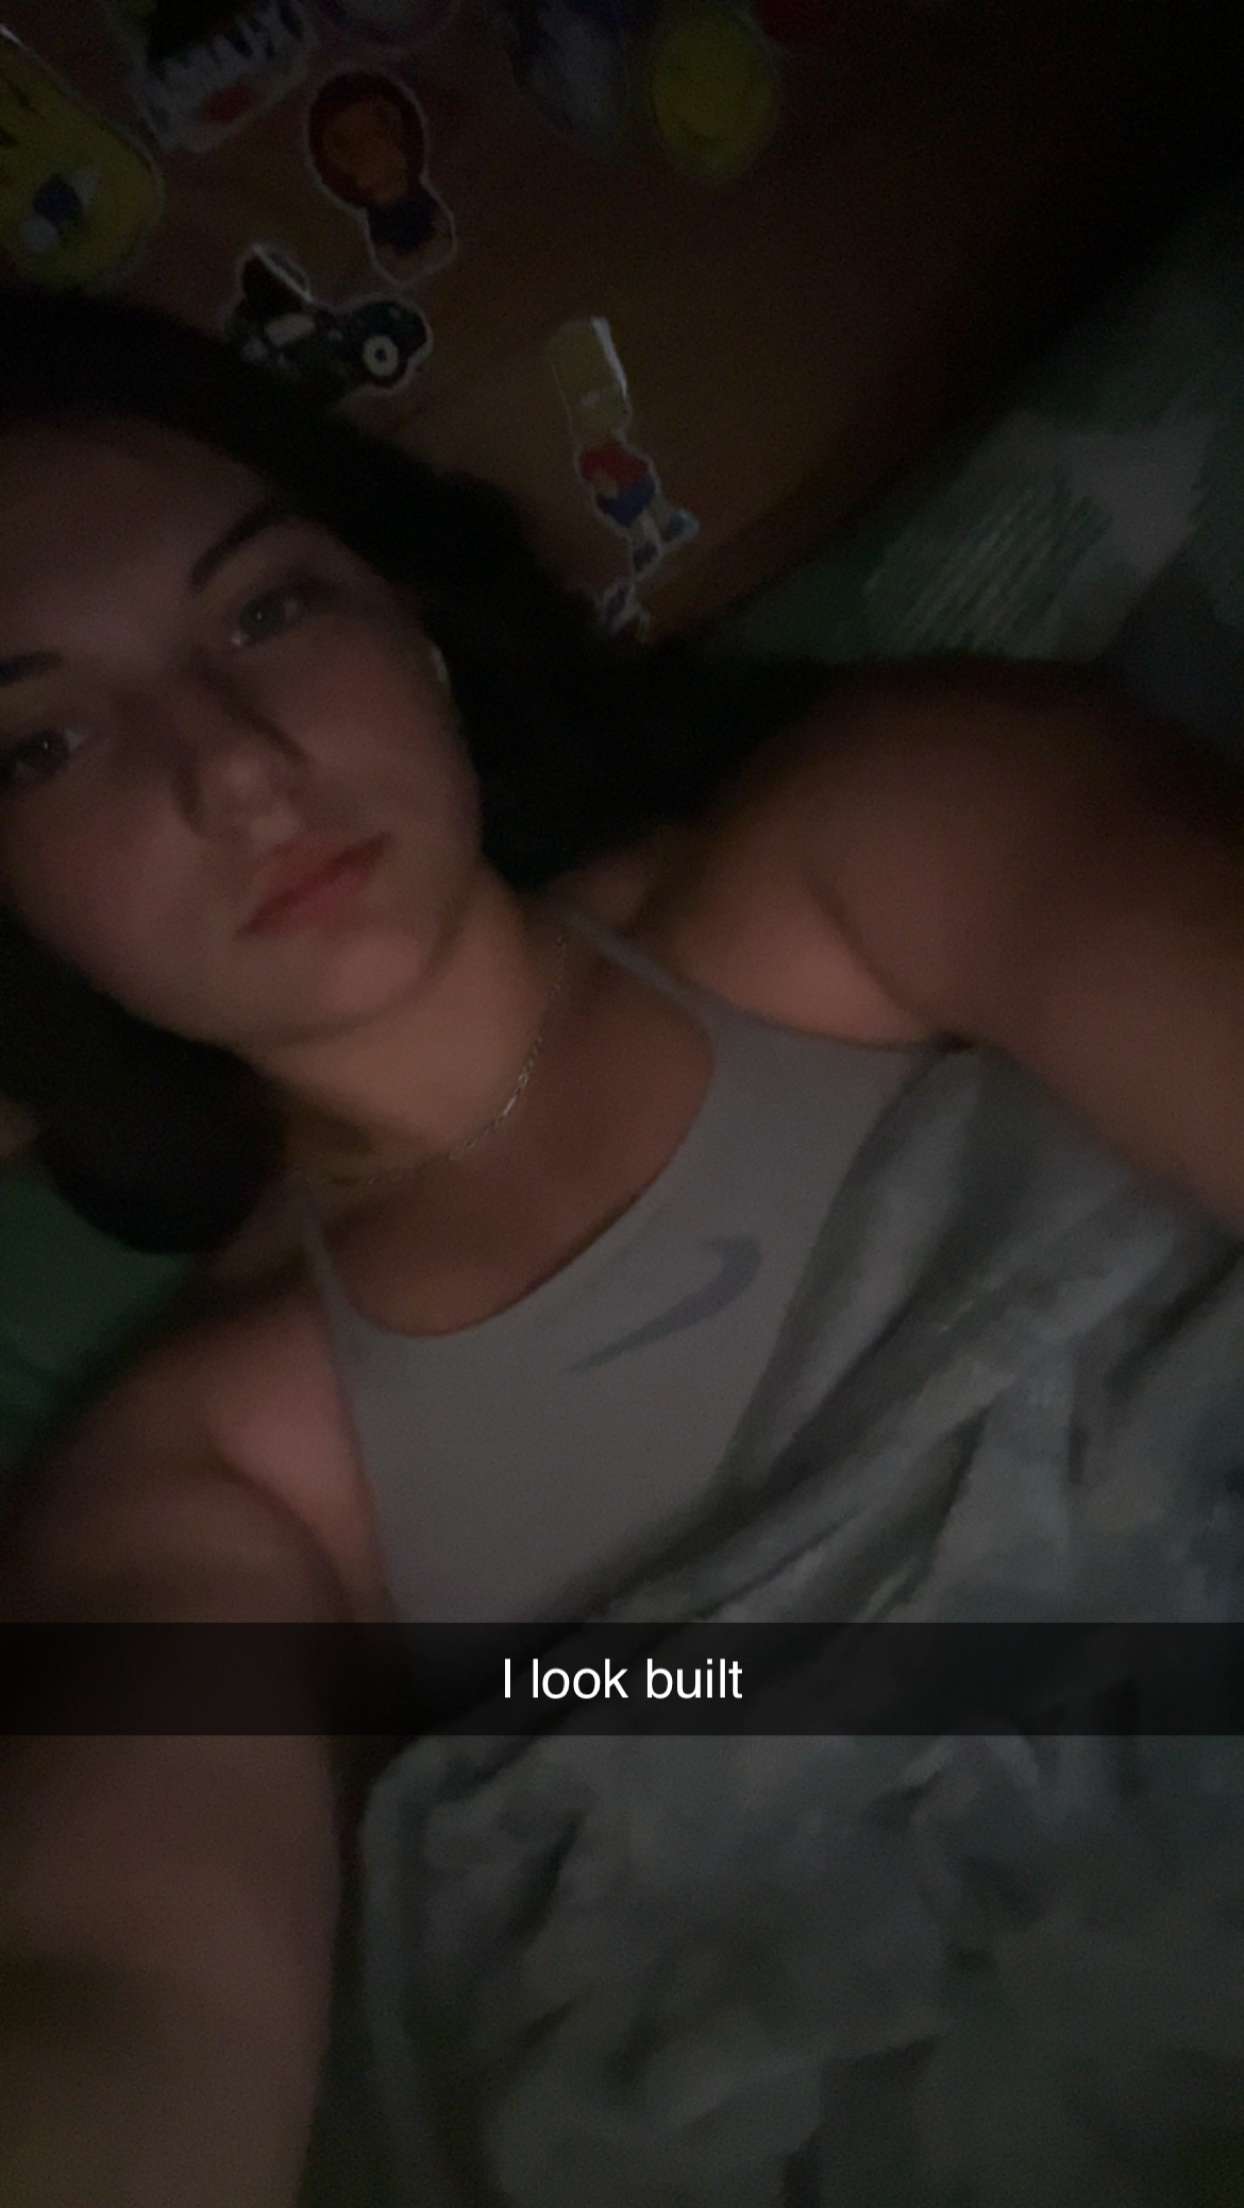 She is my snapchat friend